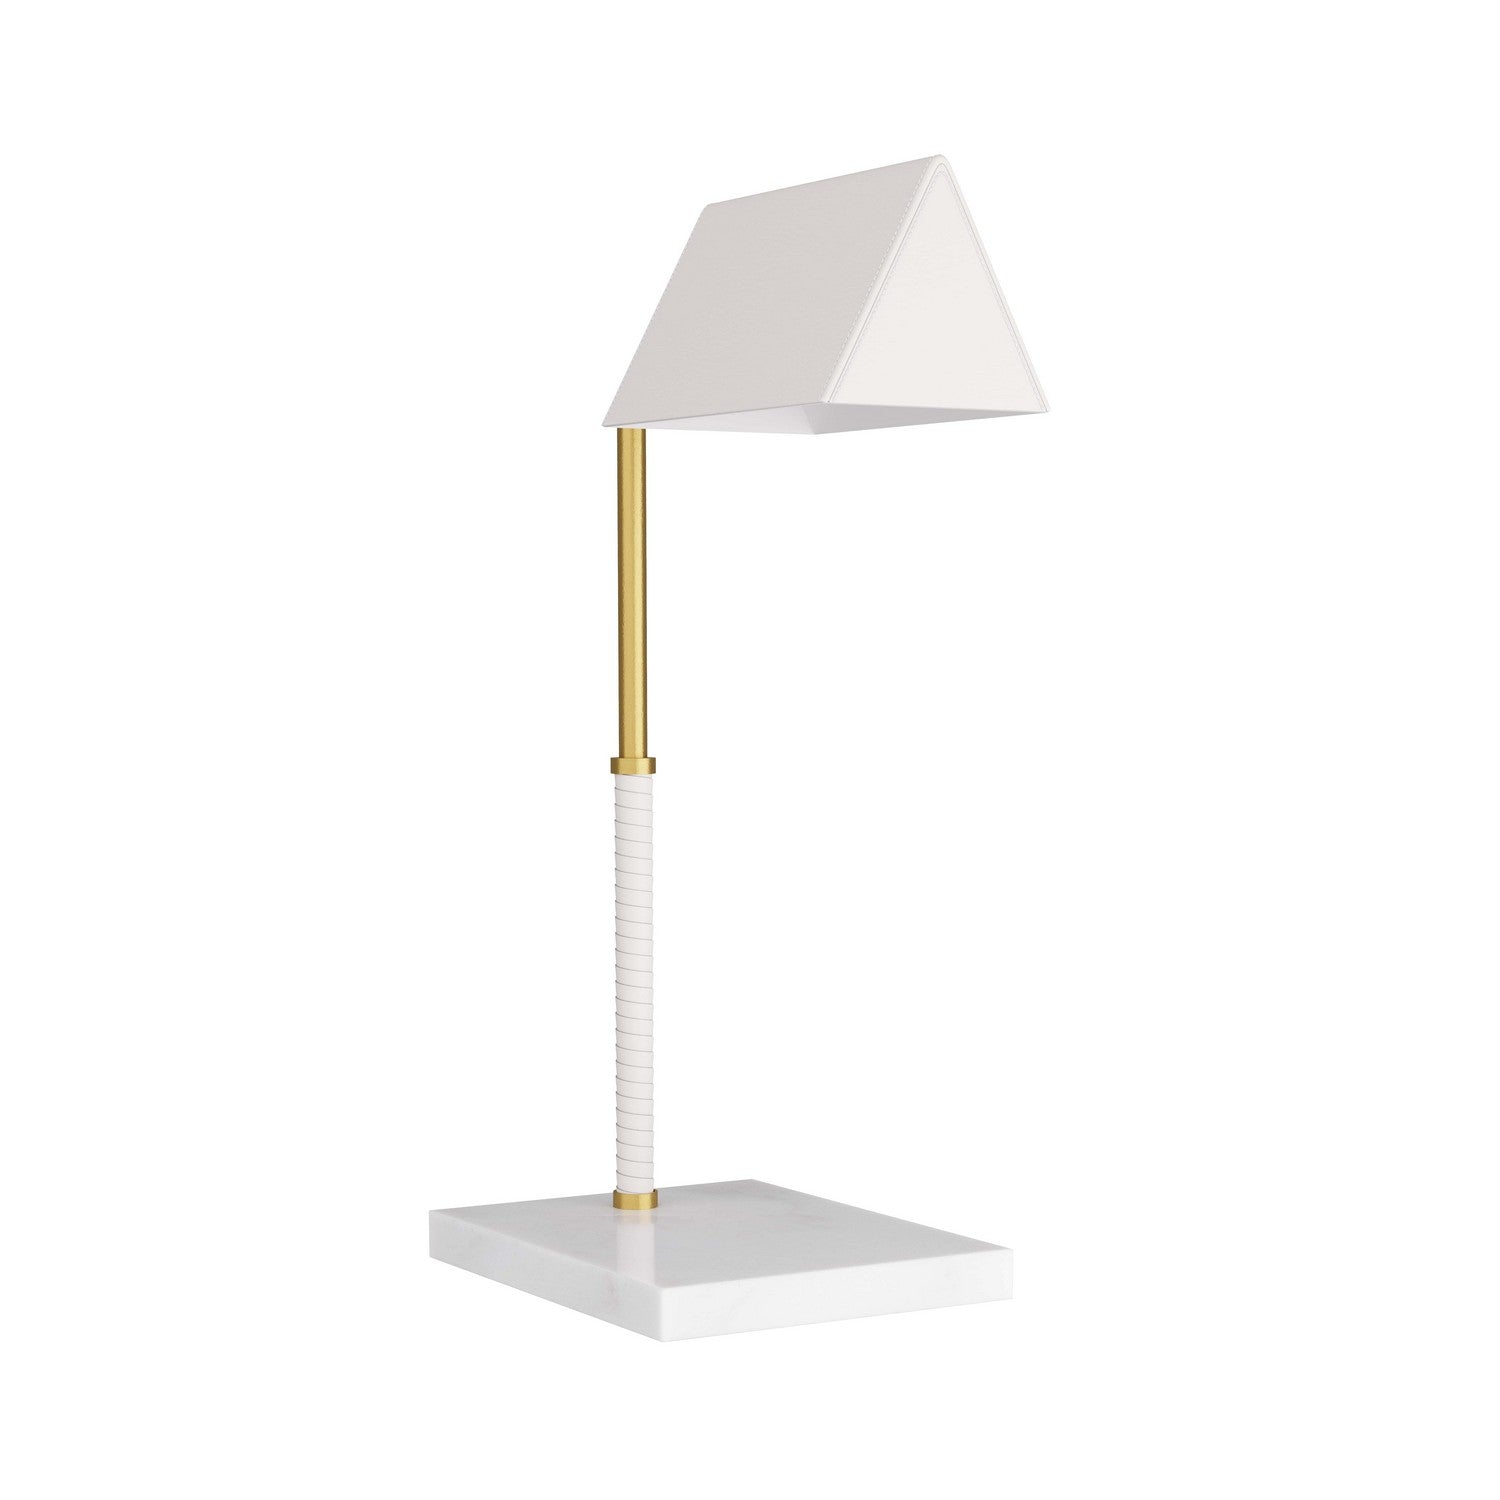 LED Table Lamp from the Tyson collection in Antique Brass finish